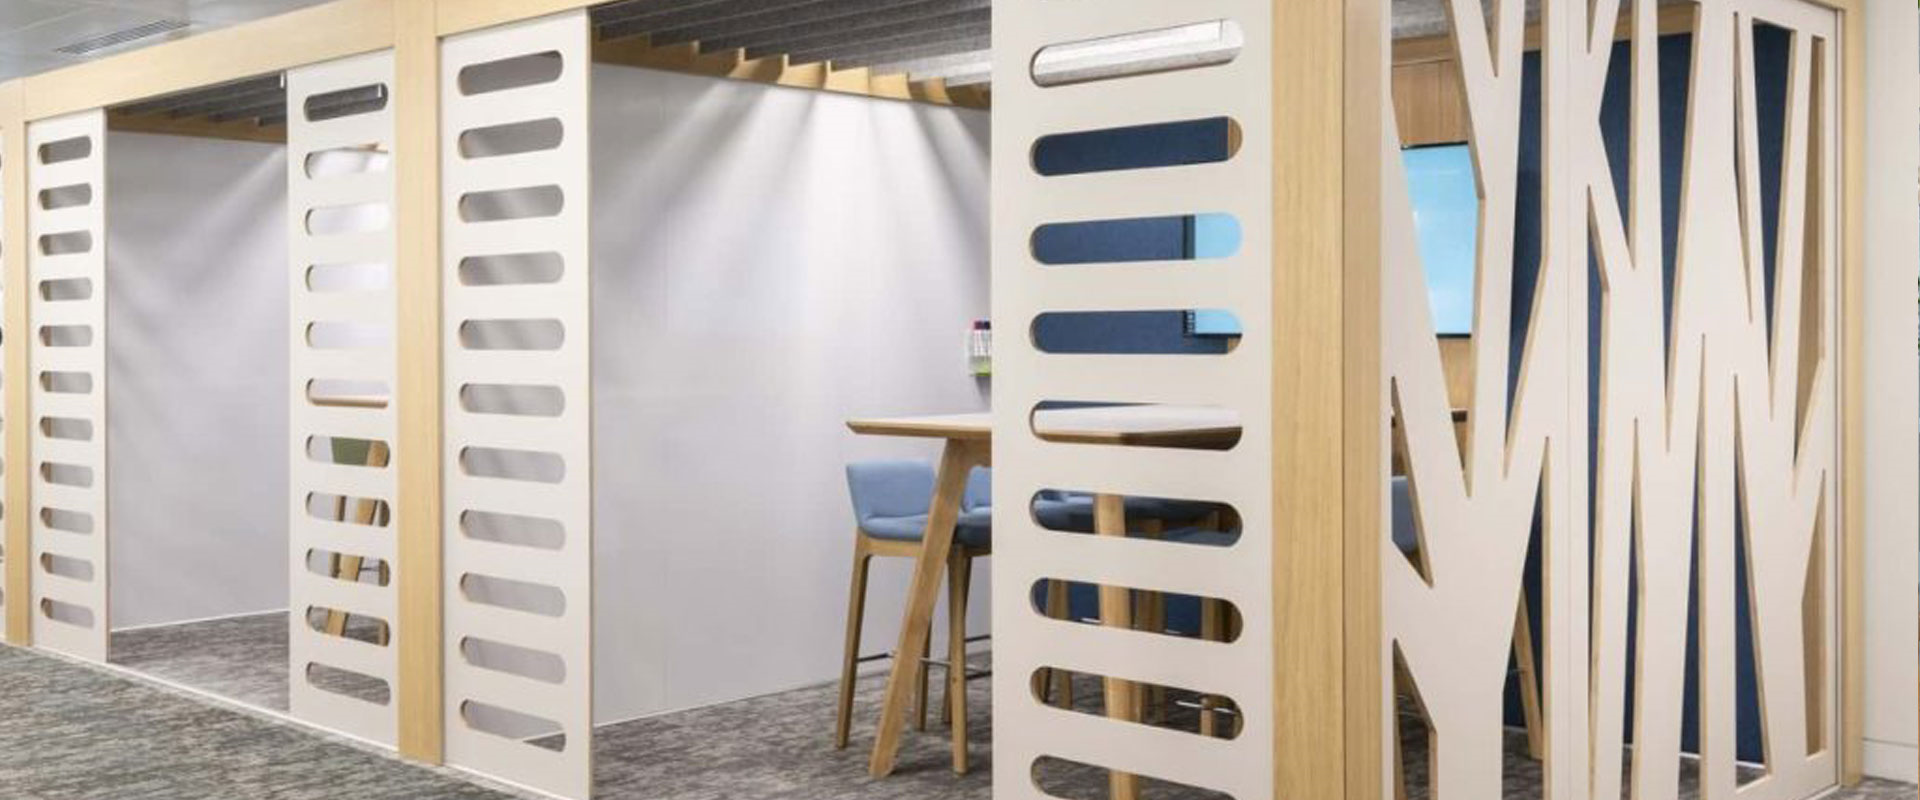 Benefits of Installing Work Pods in Your Office